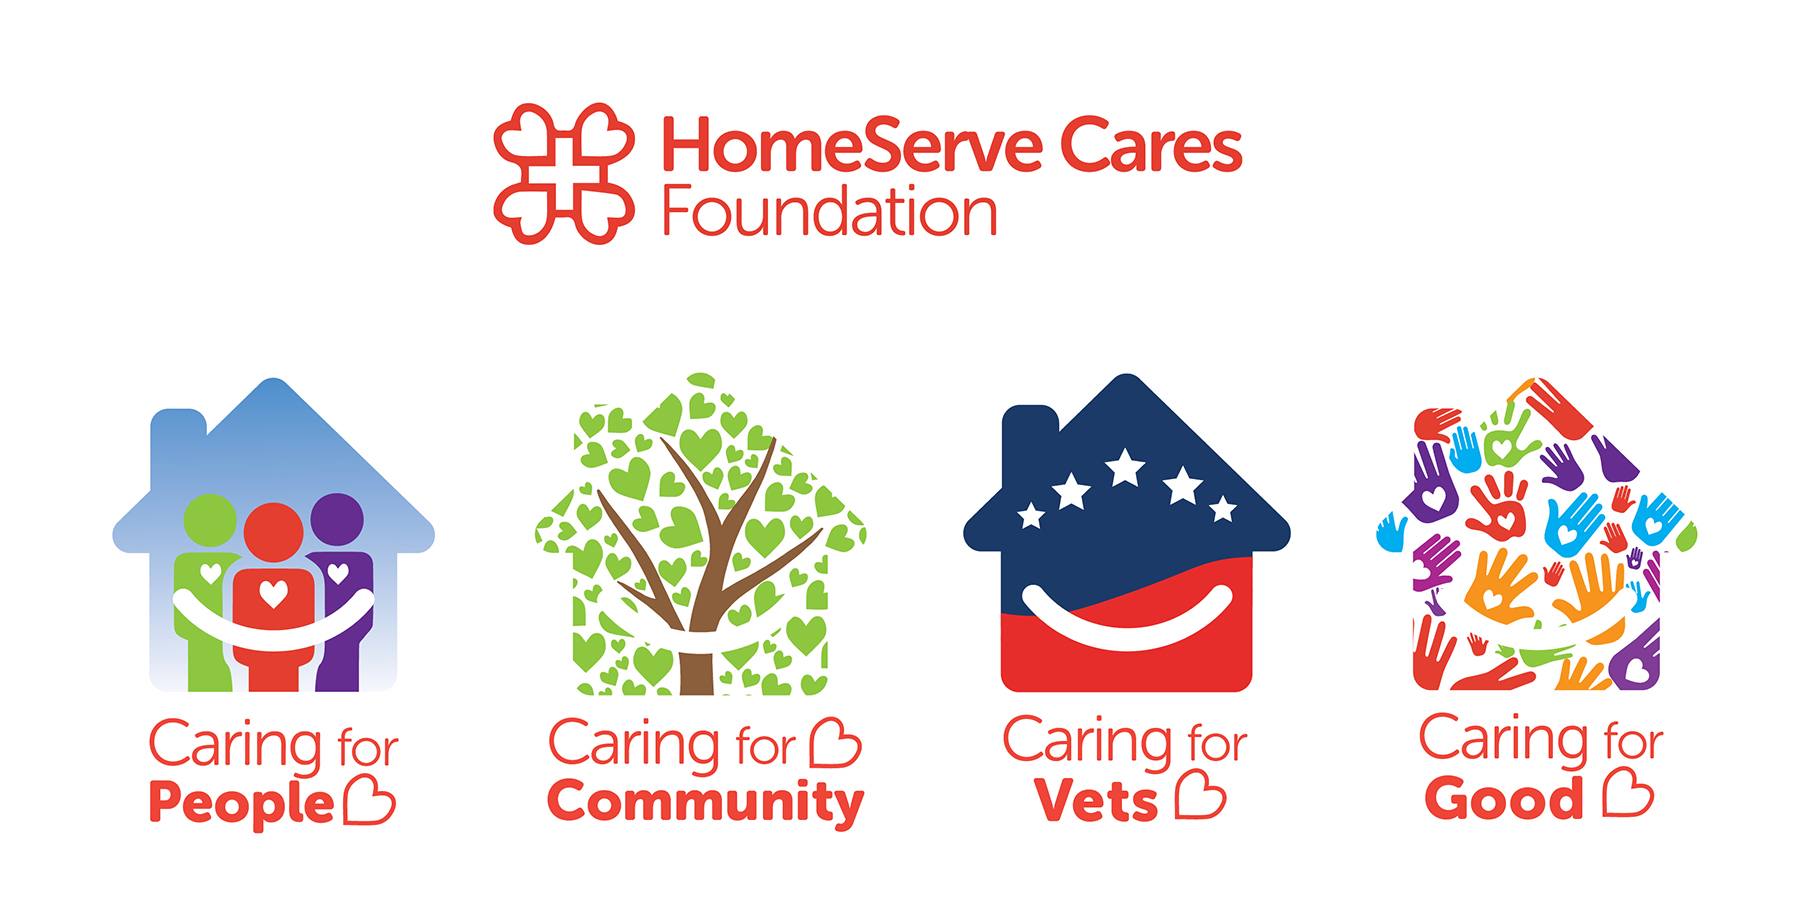 Introducing the HomeServe Cares Foundation